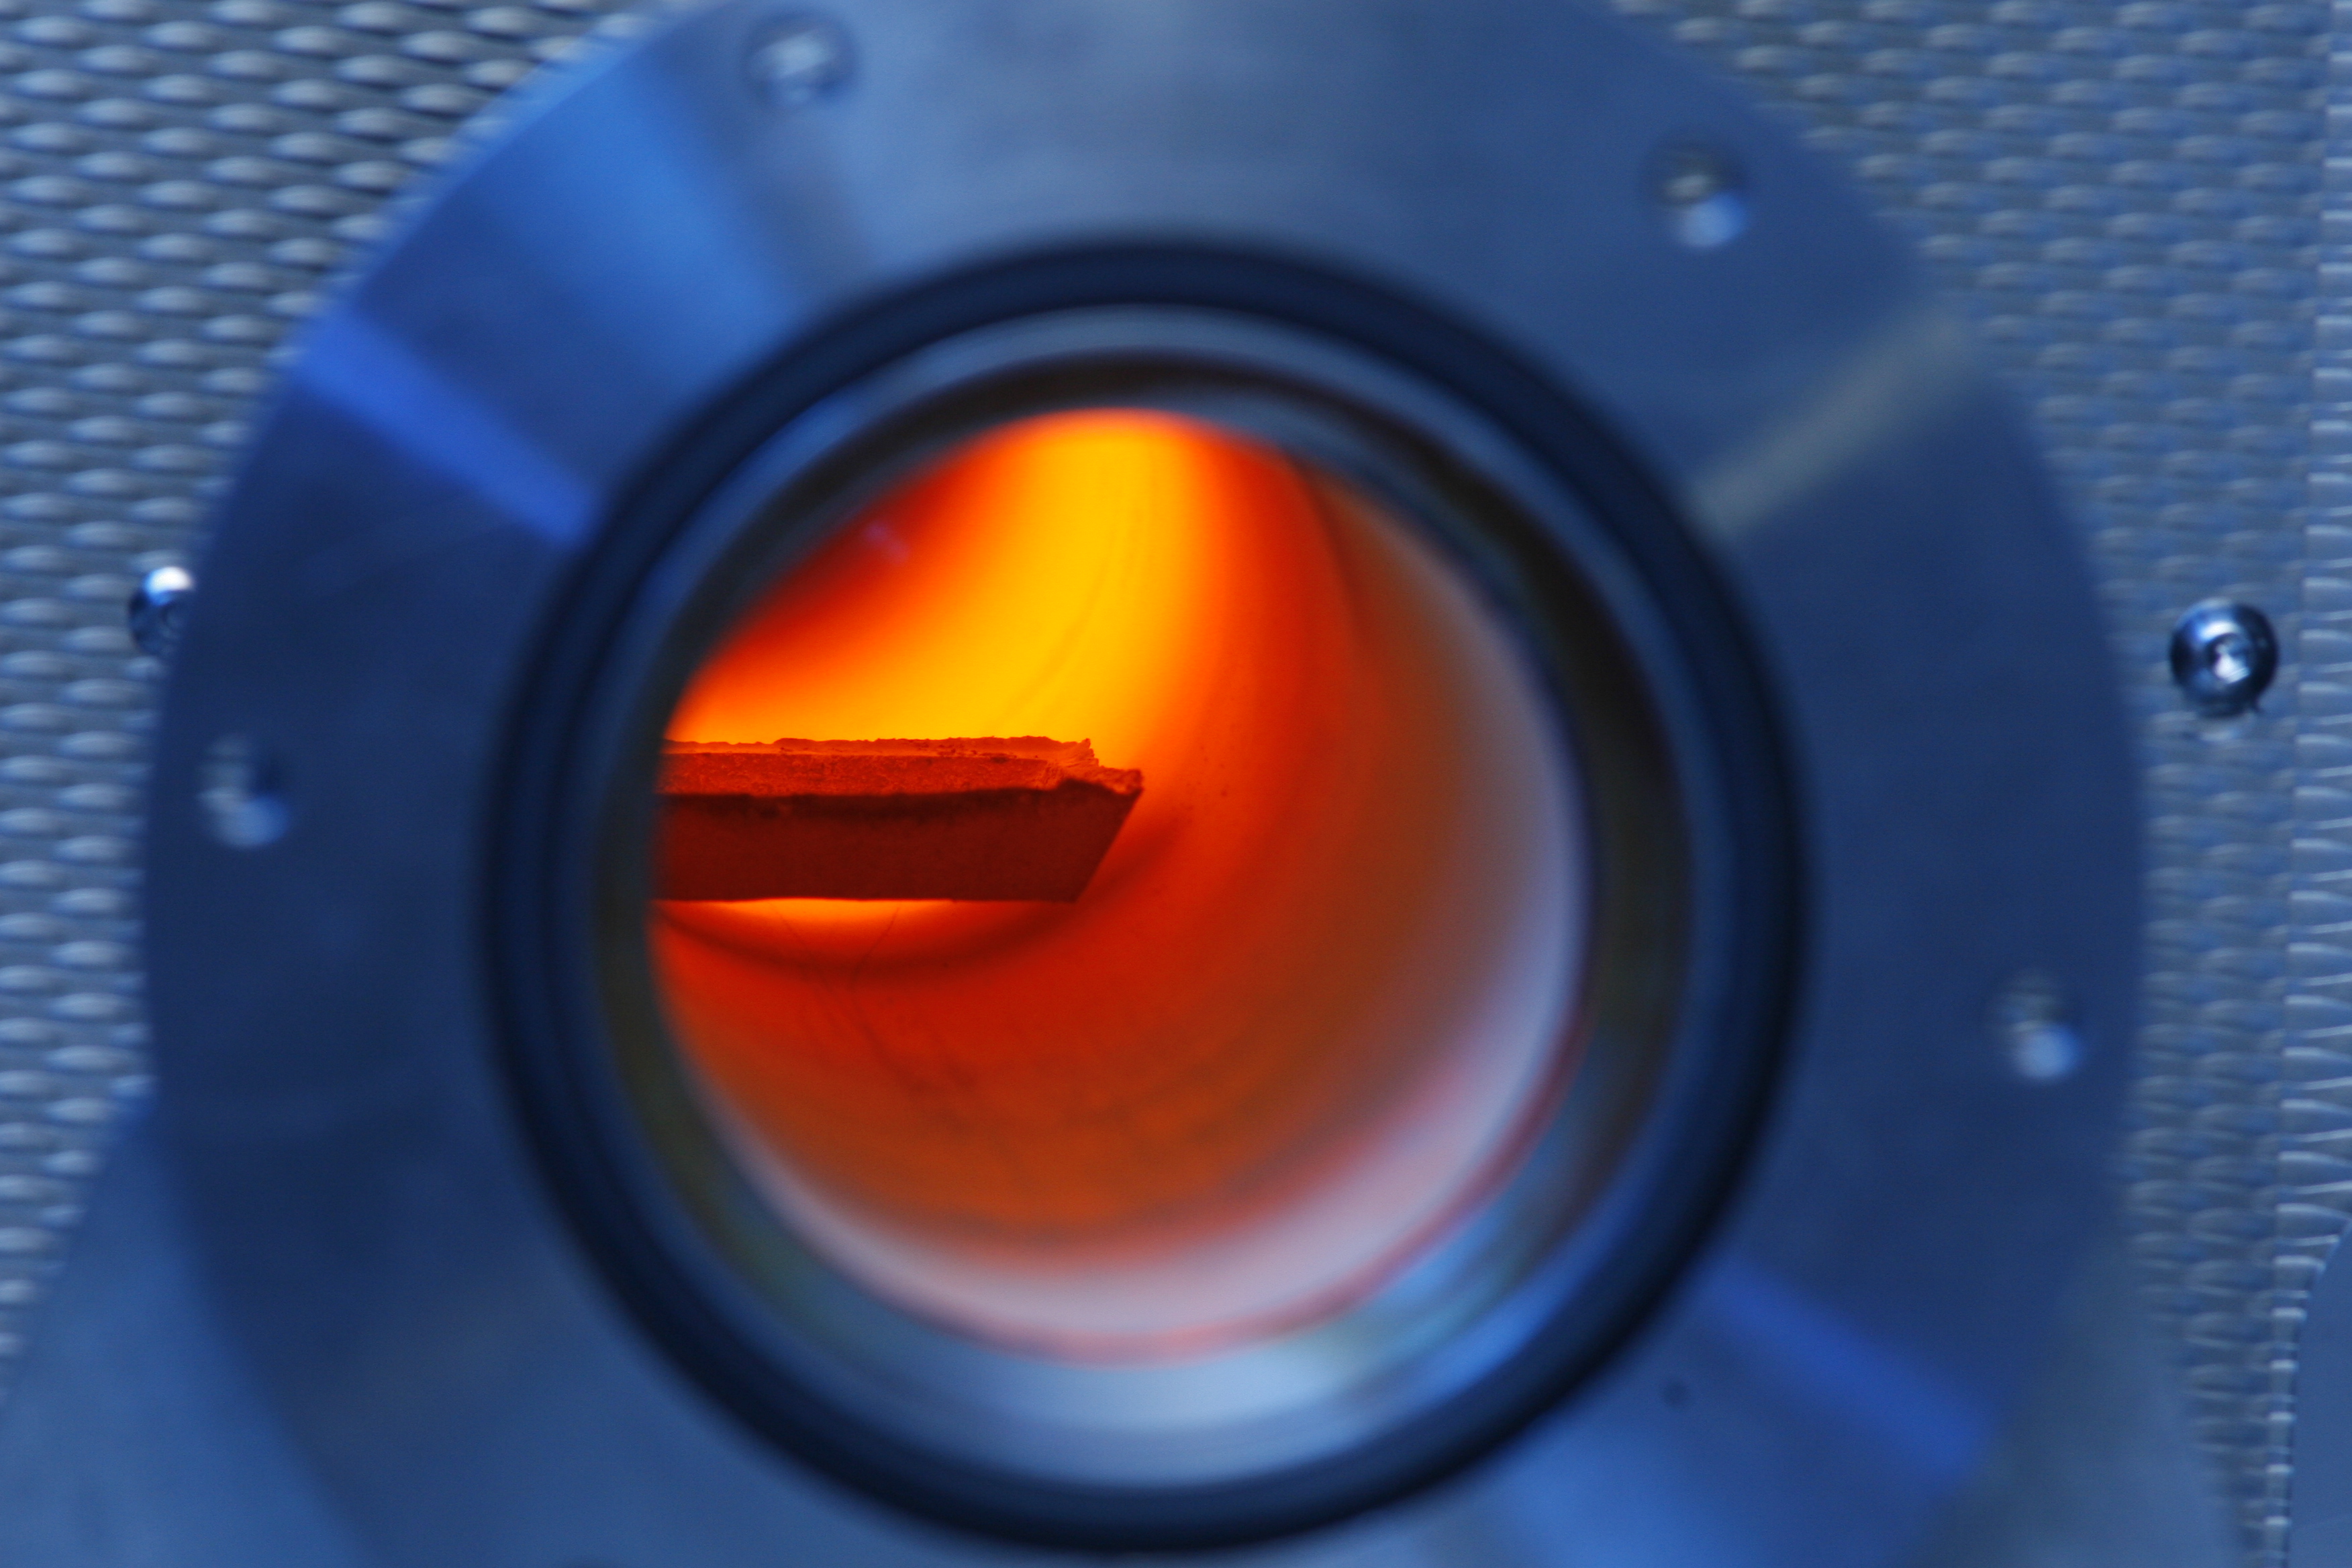 View inside a tube furnace, enlarged view